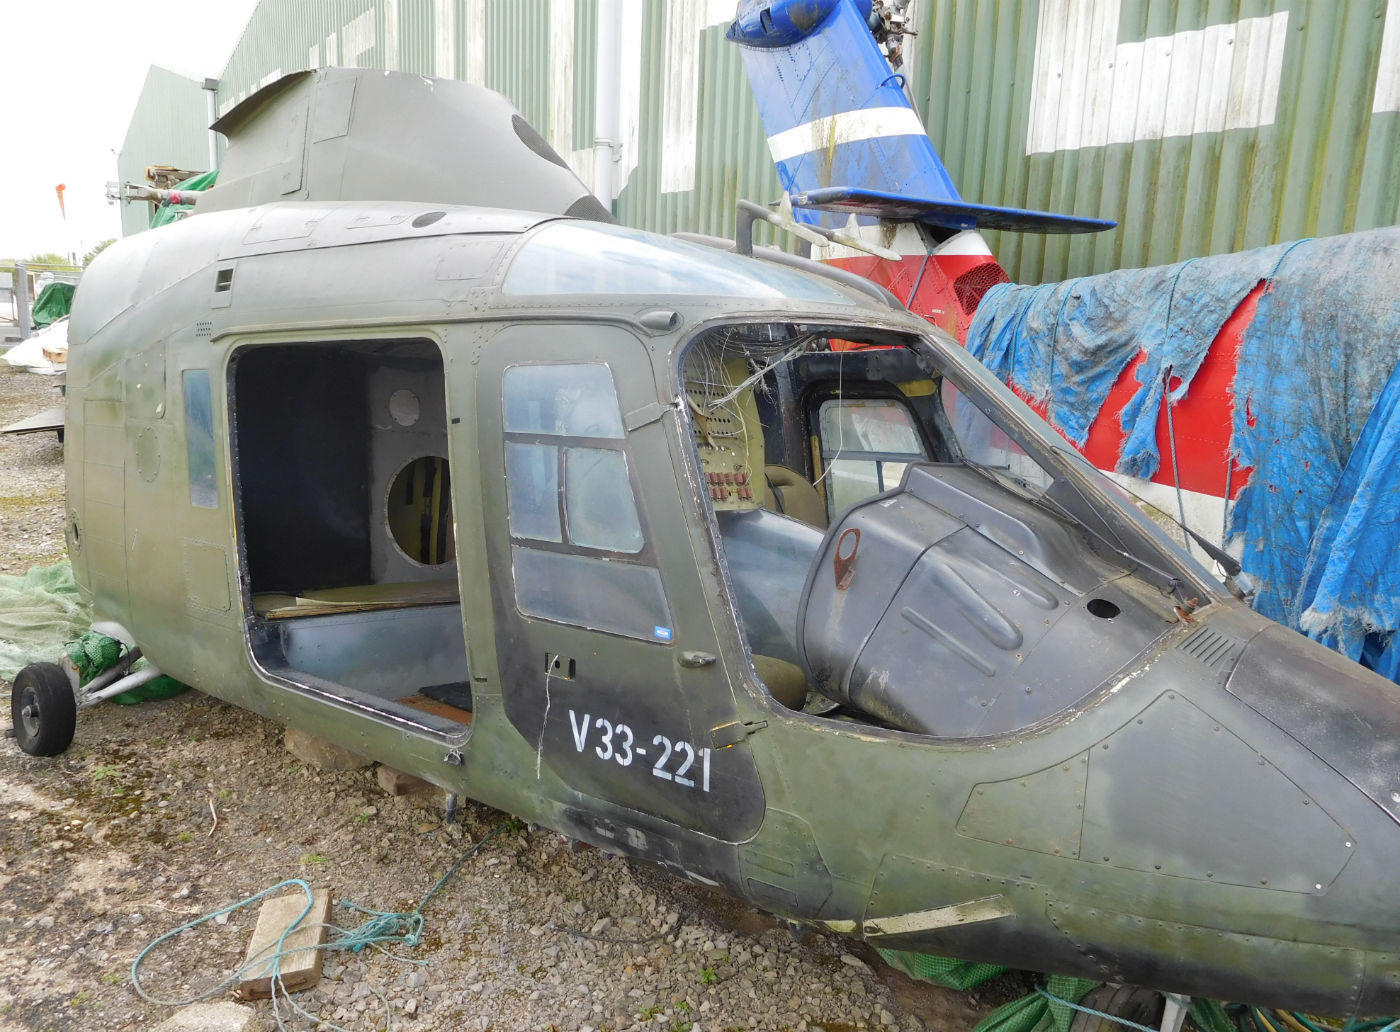 The museum will be joined by a number of private sellers bringing other unusual items such as Gazelle armored pilot seats and the front canopy of a Folland Gnat. There will also be lots of aviation memorabilia for sale including books, magazines, models and prints. The Helicopter Museum Photo